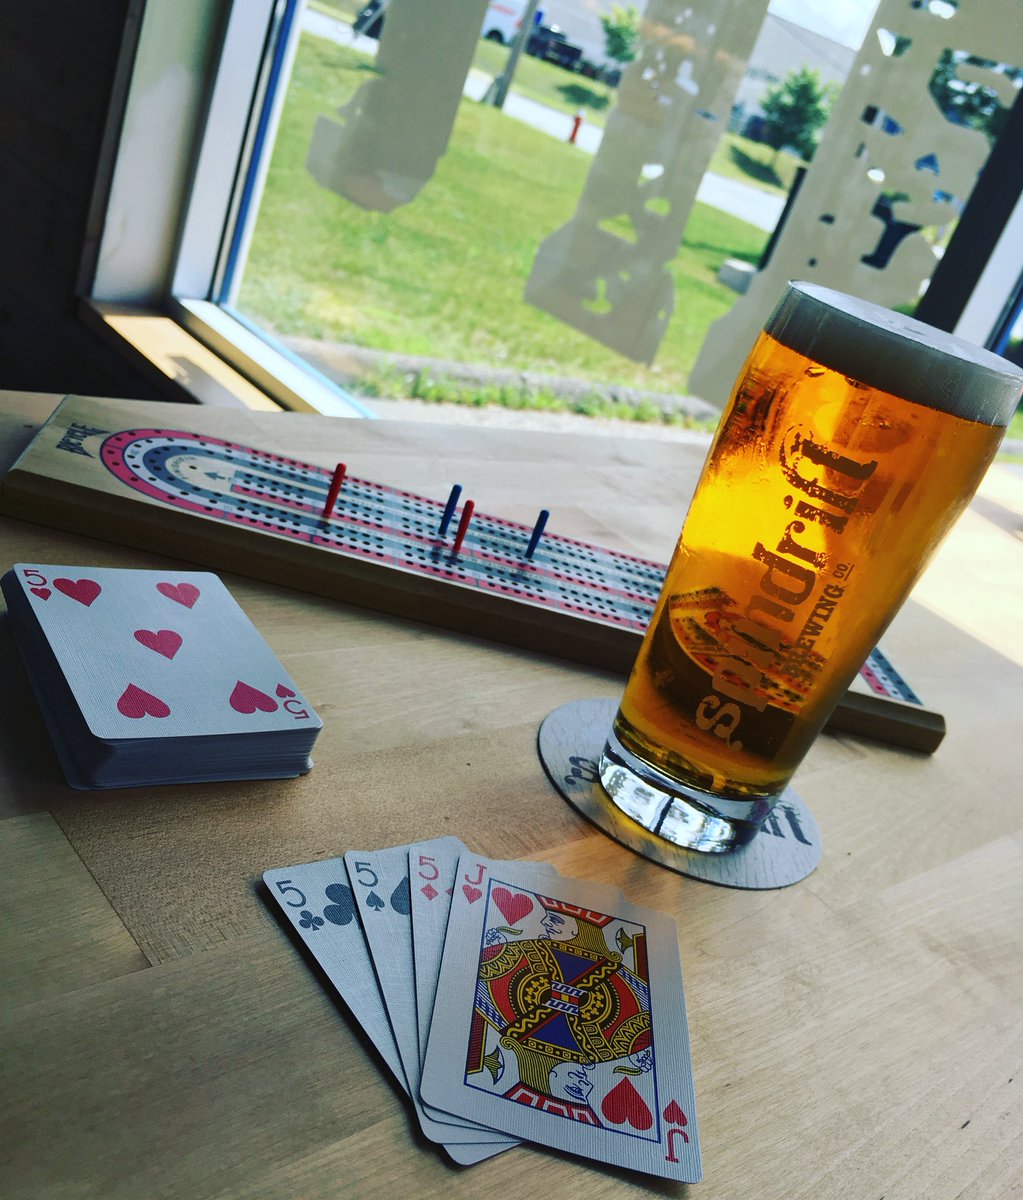 The #perfecthand deserves the #perfectpour 🍻♥️👏🏻 #nailedit #cribandbeer #cominguphearts #knottyhandforaknottybuoy 
•
•
•
#nscraftbeer #craftbeer #beer #supportlocal #drinklocal #dartmouth #novascotia #cribbage #crib #pints #knottybuoypils #pilsner